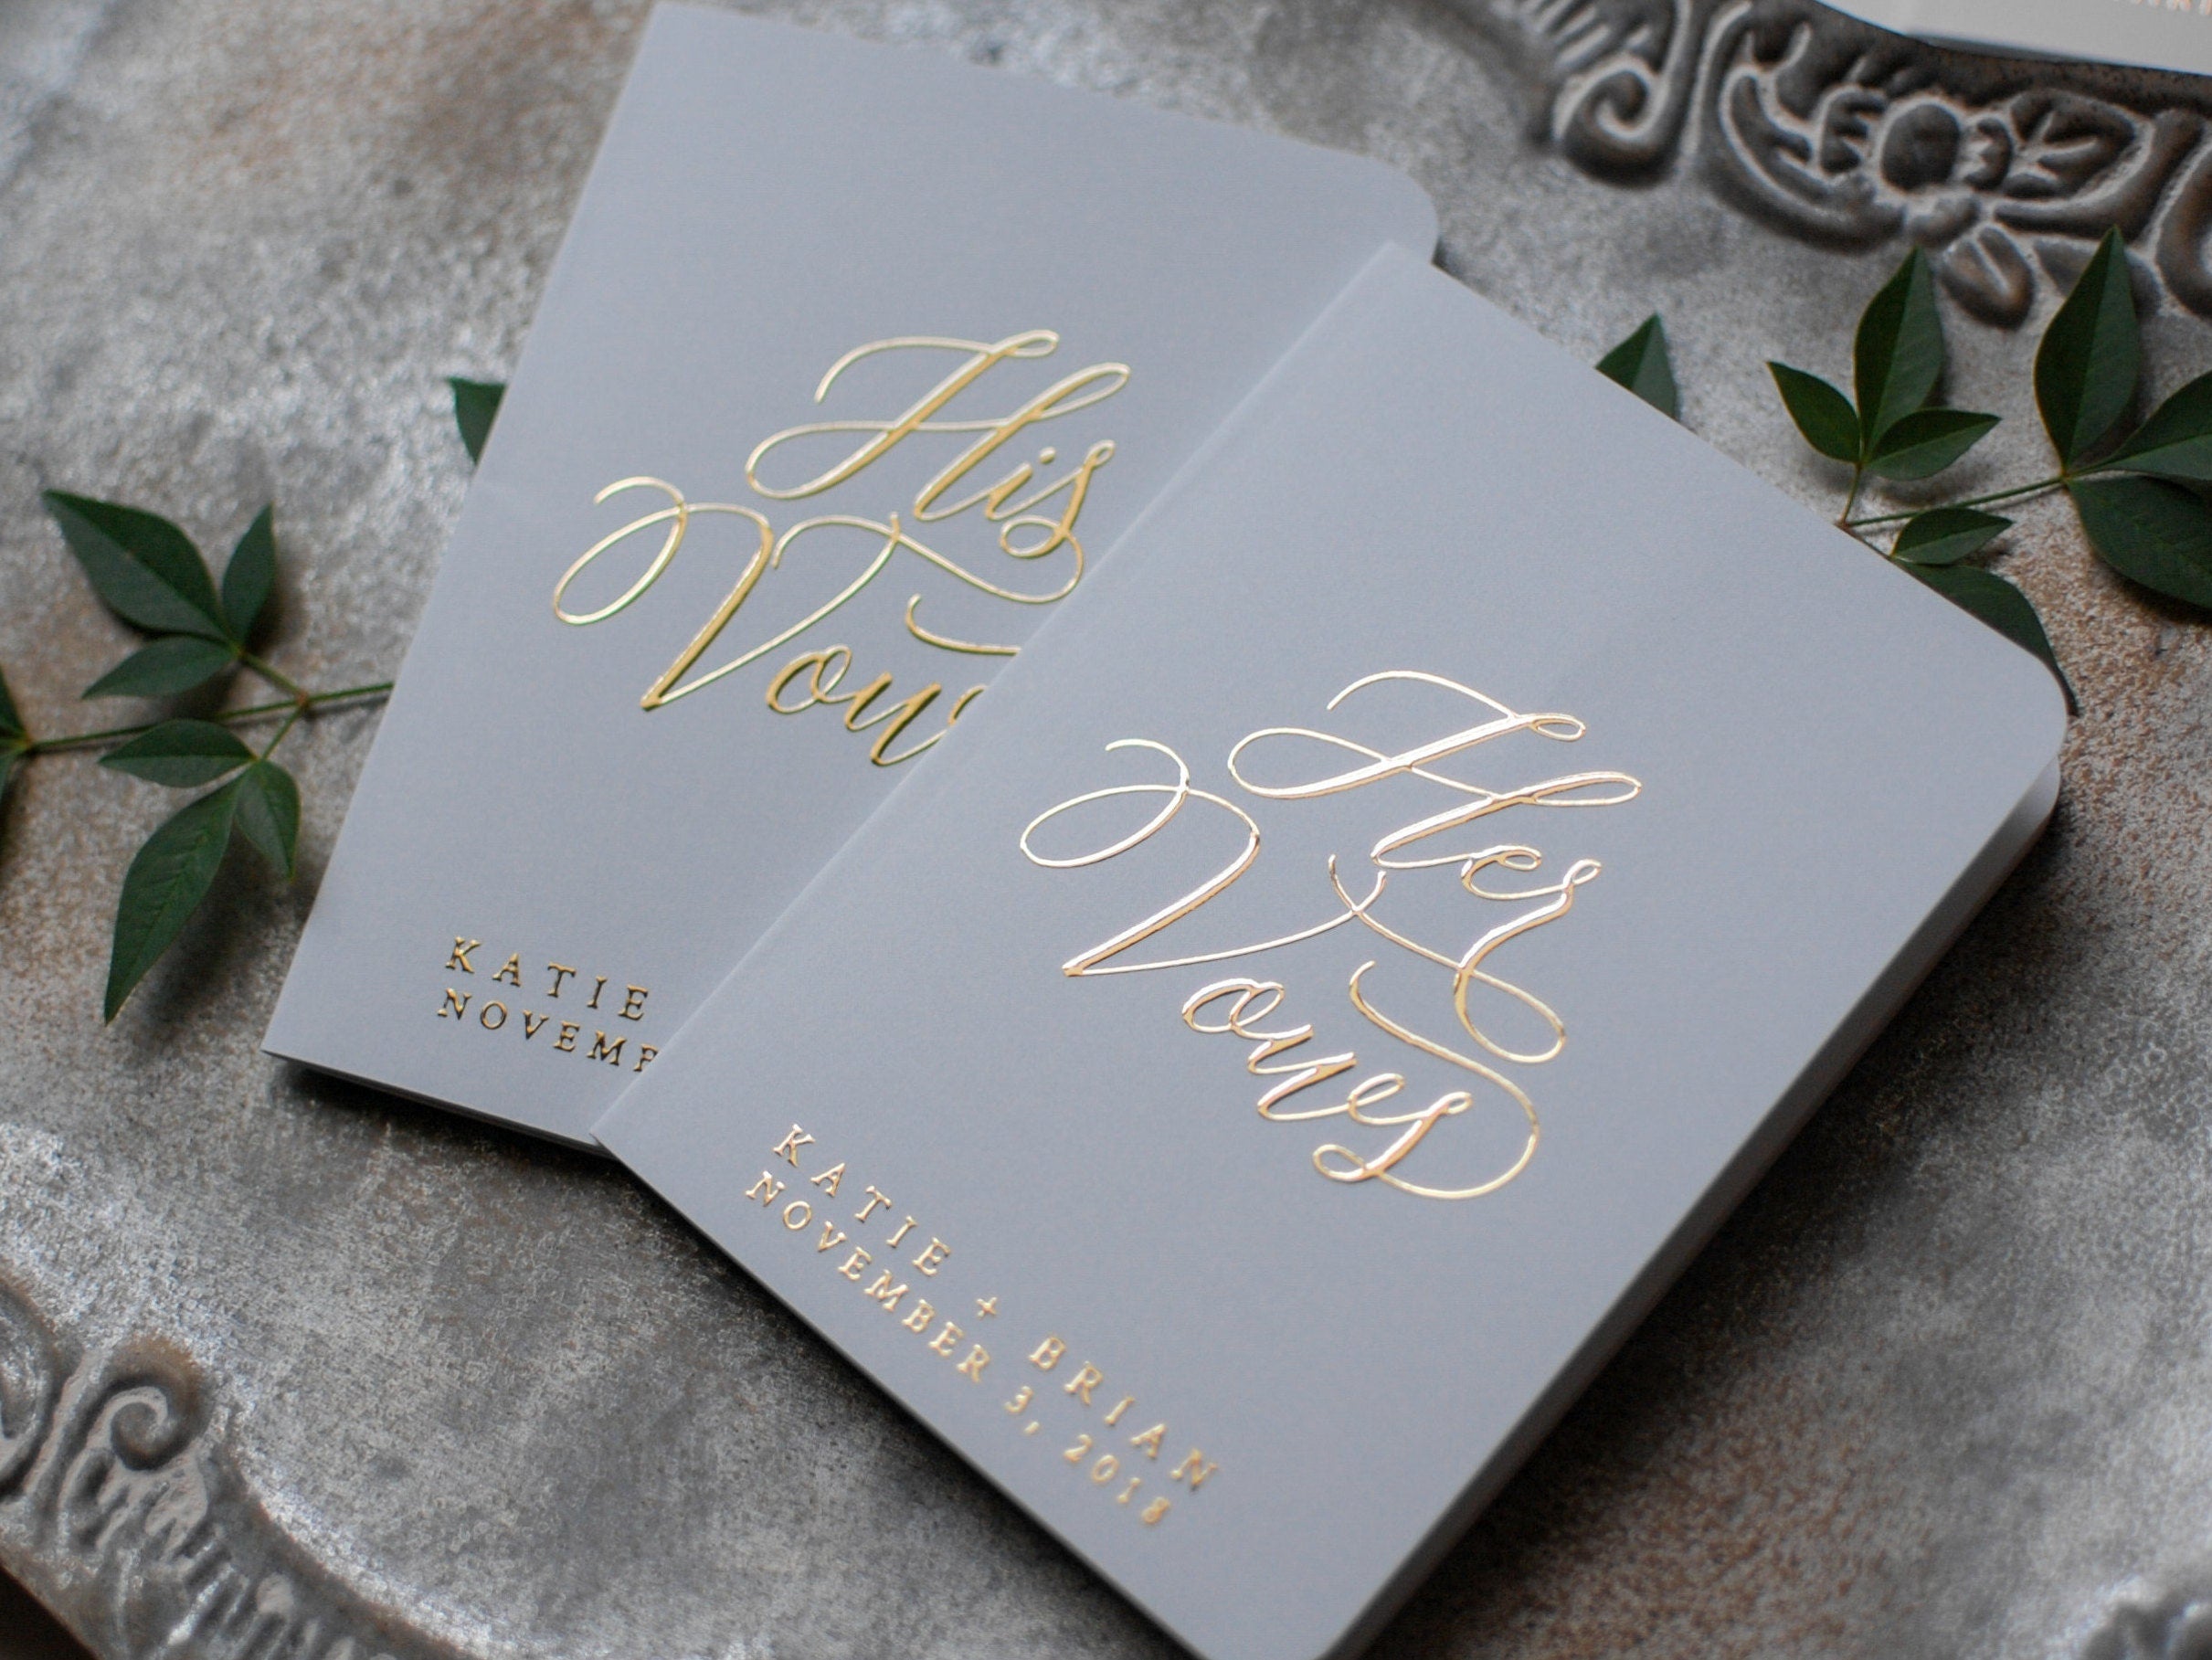 Personalized Wedding Vow Booklets, Matching Vow Books, Custom Wedding Vow Booklets, Grey Vow Books